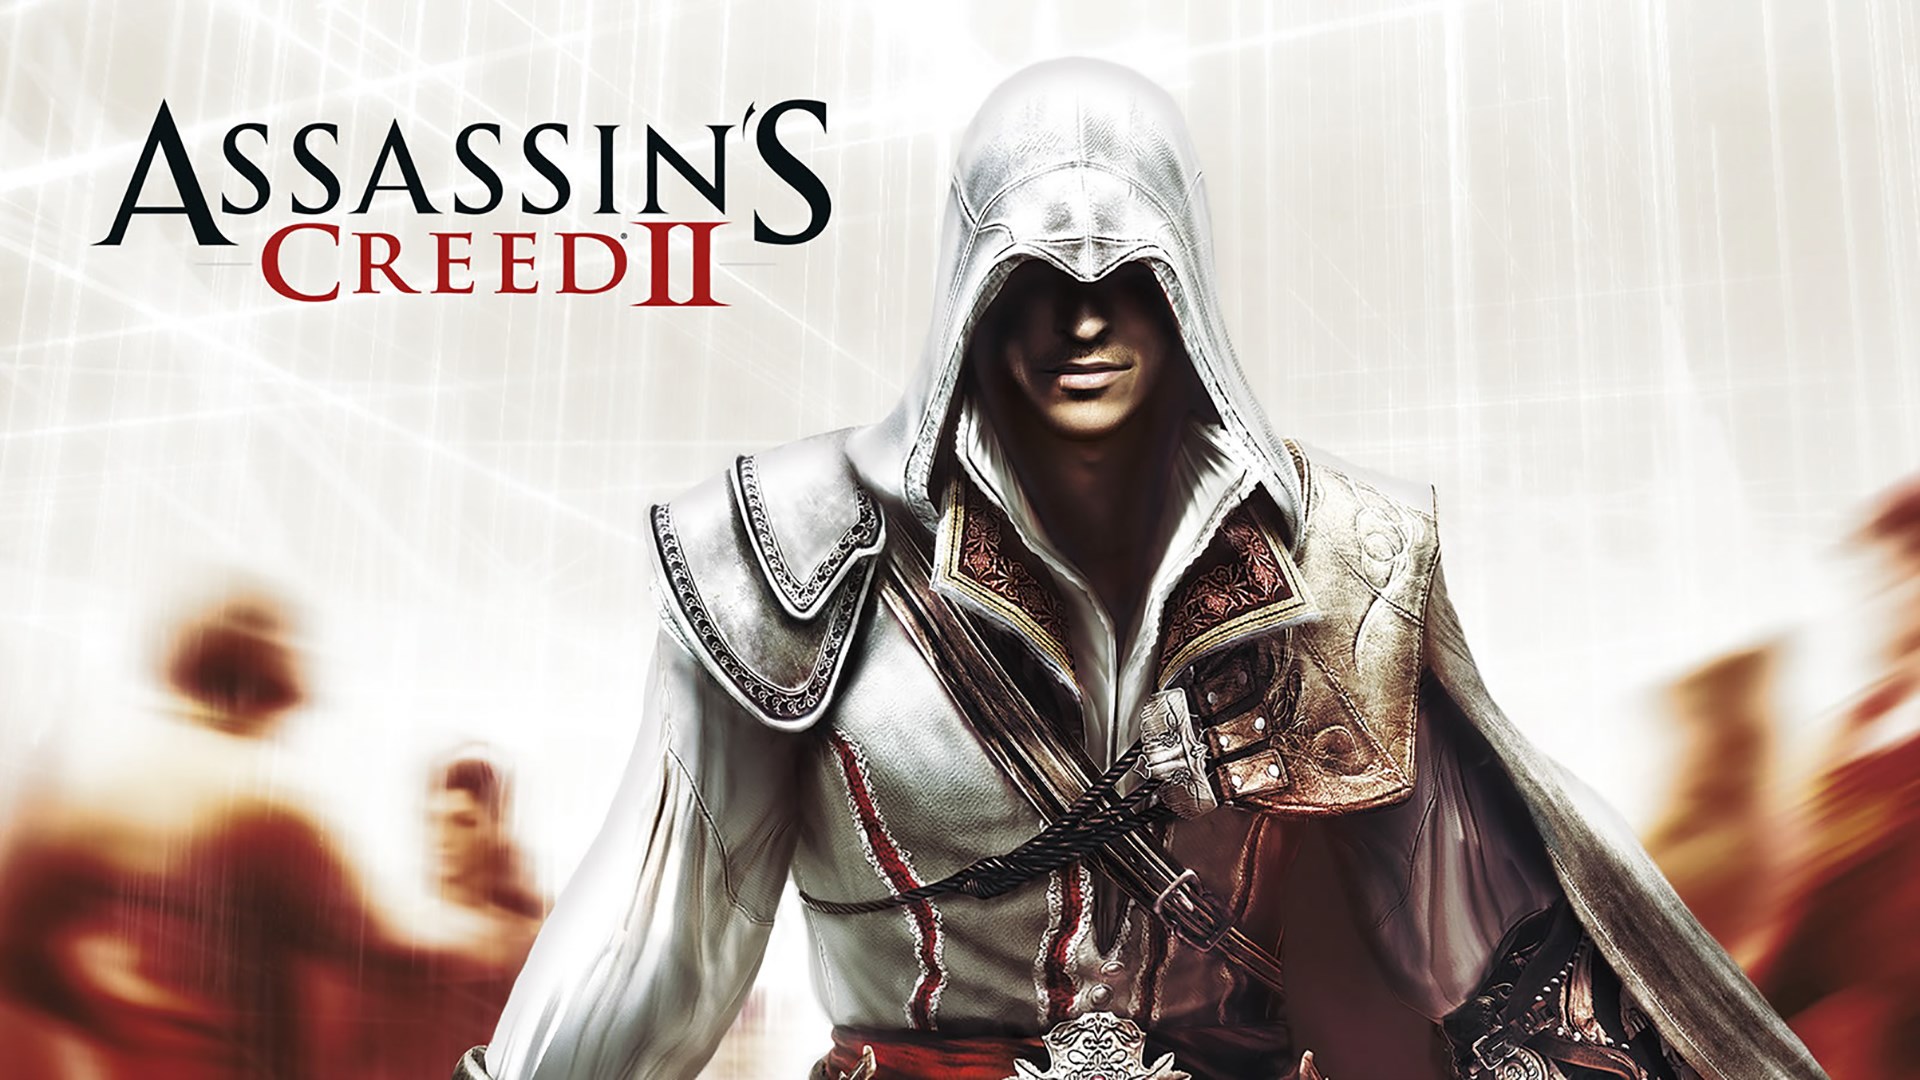 Assassins Creed II free full pc game for download